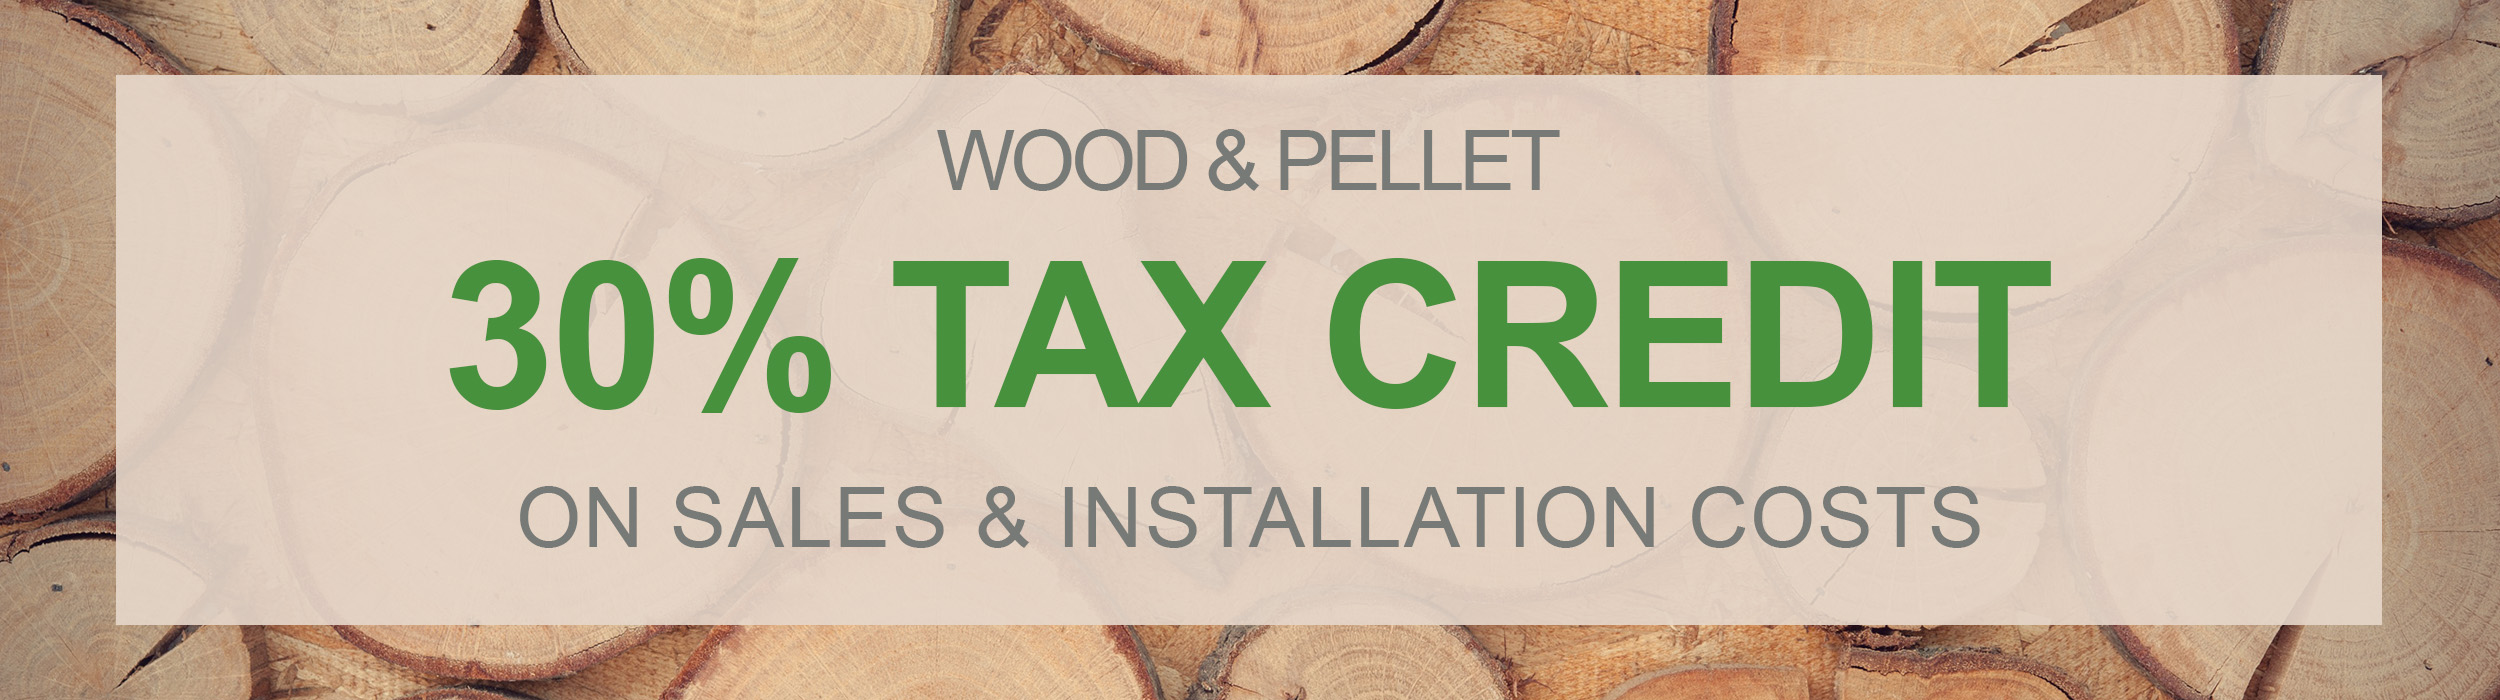 wood and pellet 30% federal tax credit. save 30% on purchase and installation